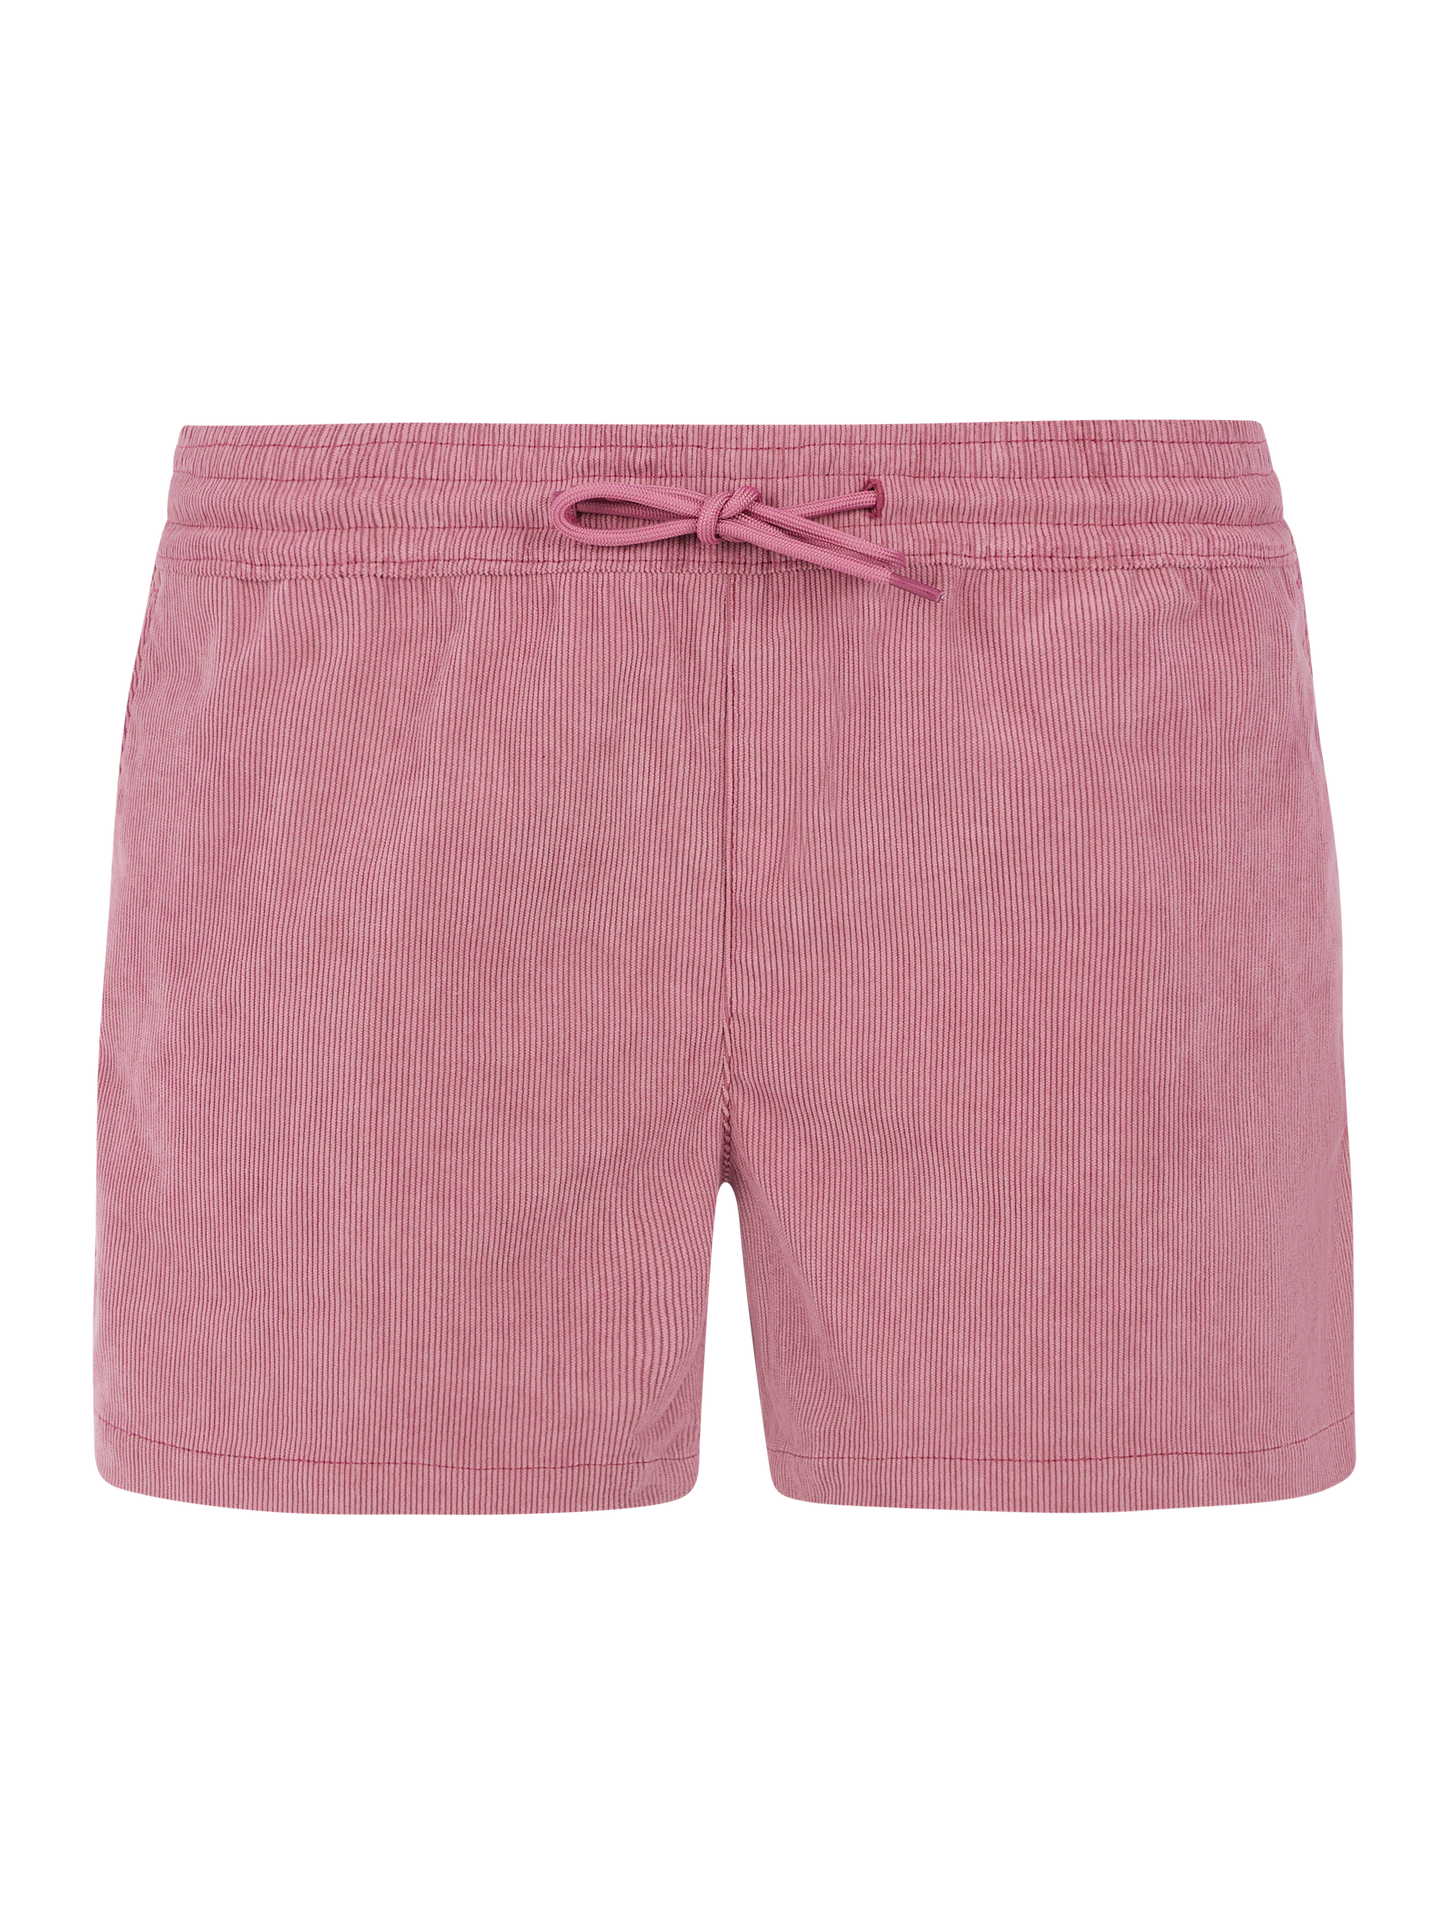 Protest Anoa Shorts in Deco Pink